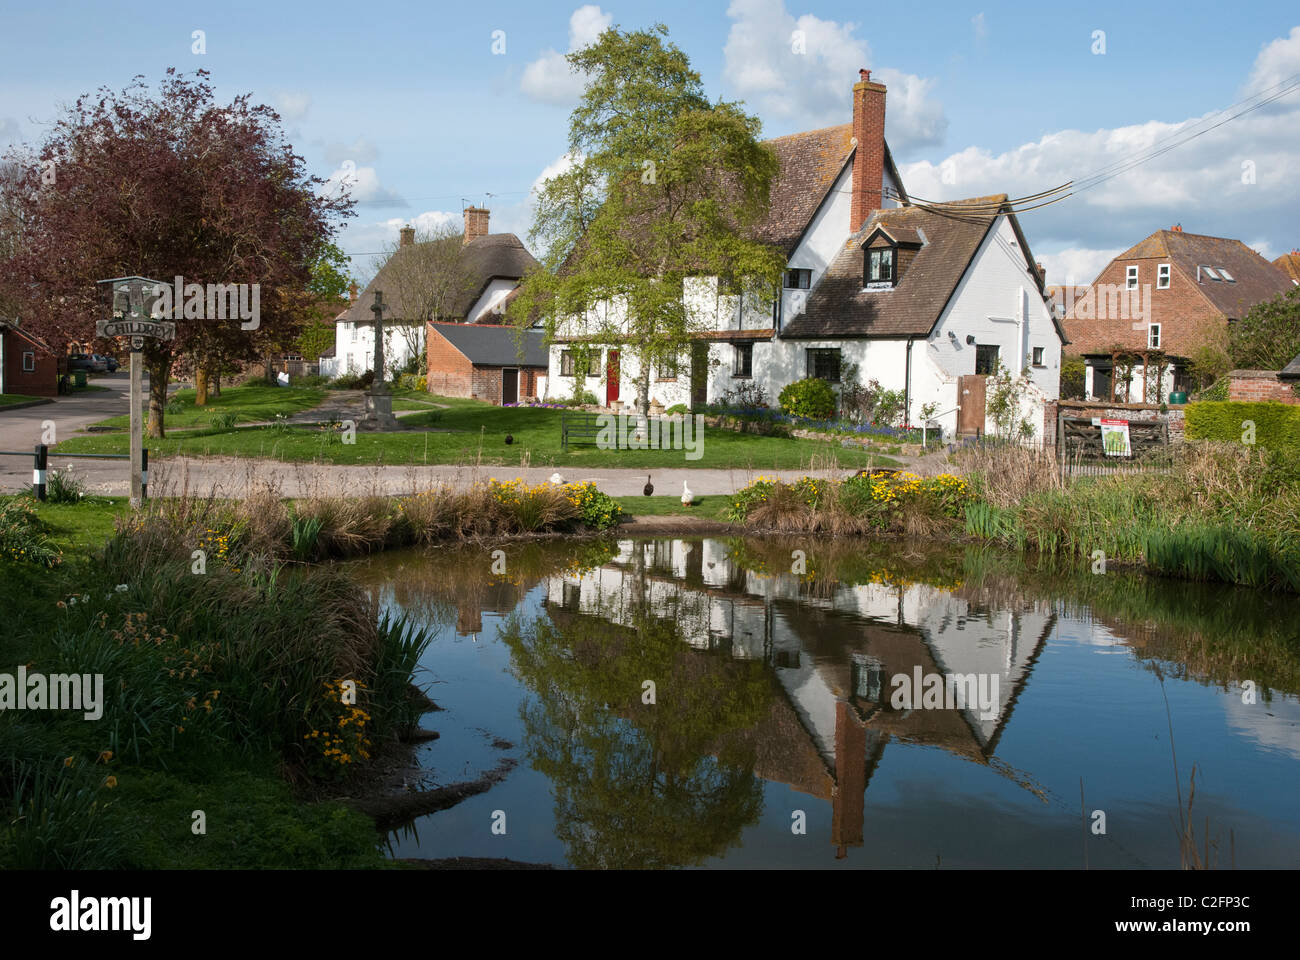 The beautiful village of Childrey in the Vale of the White Horse, Oxfordshire, England, UK. Stock Photo